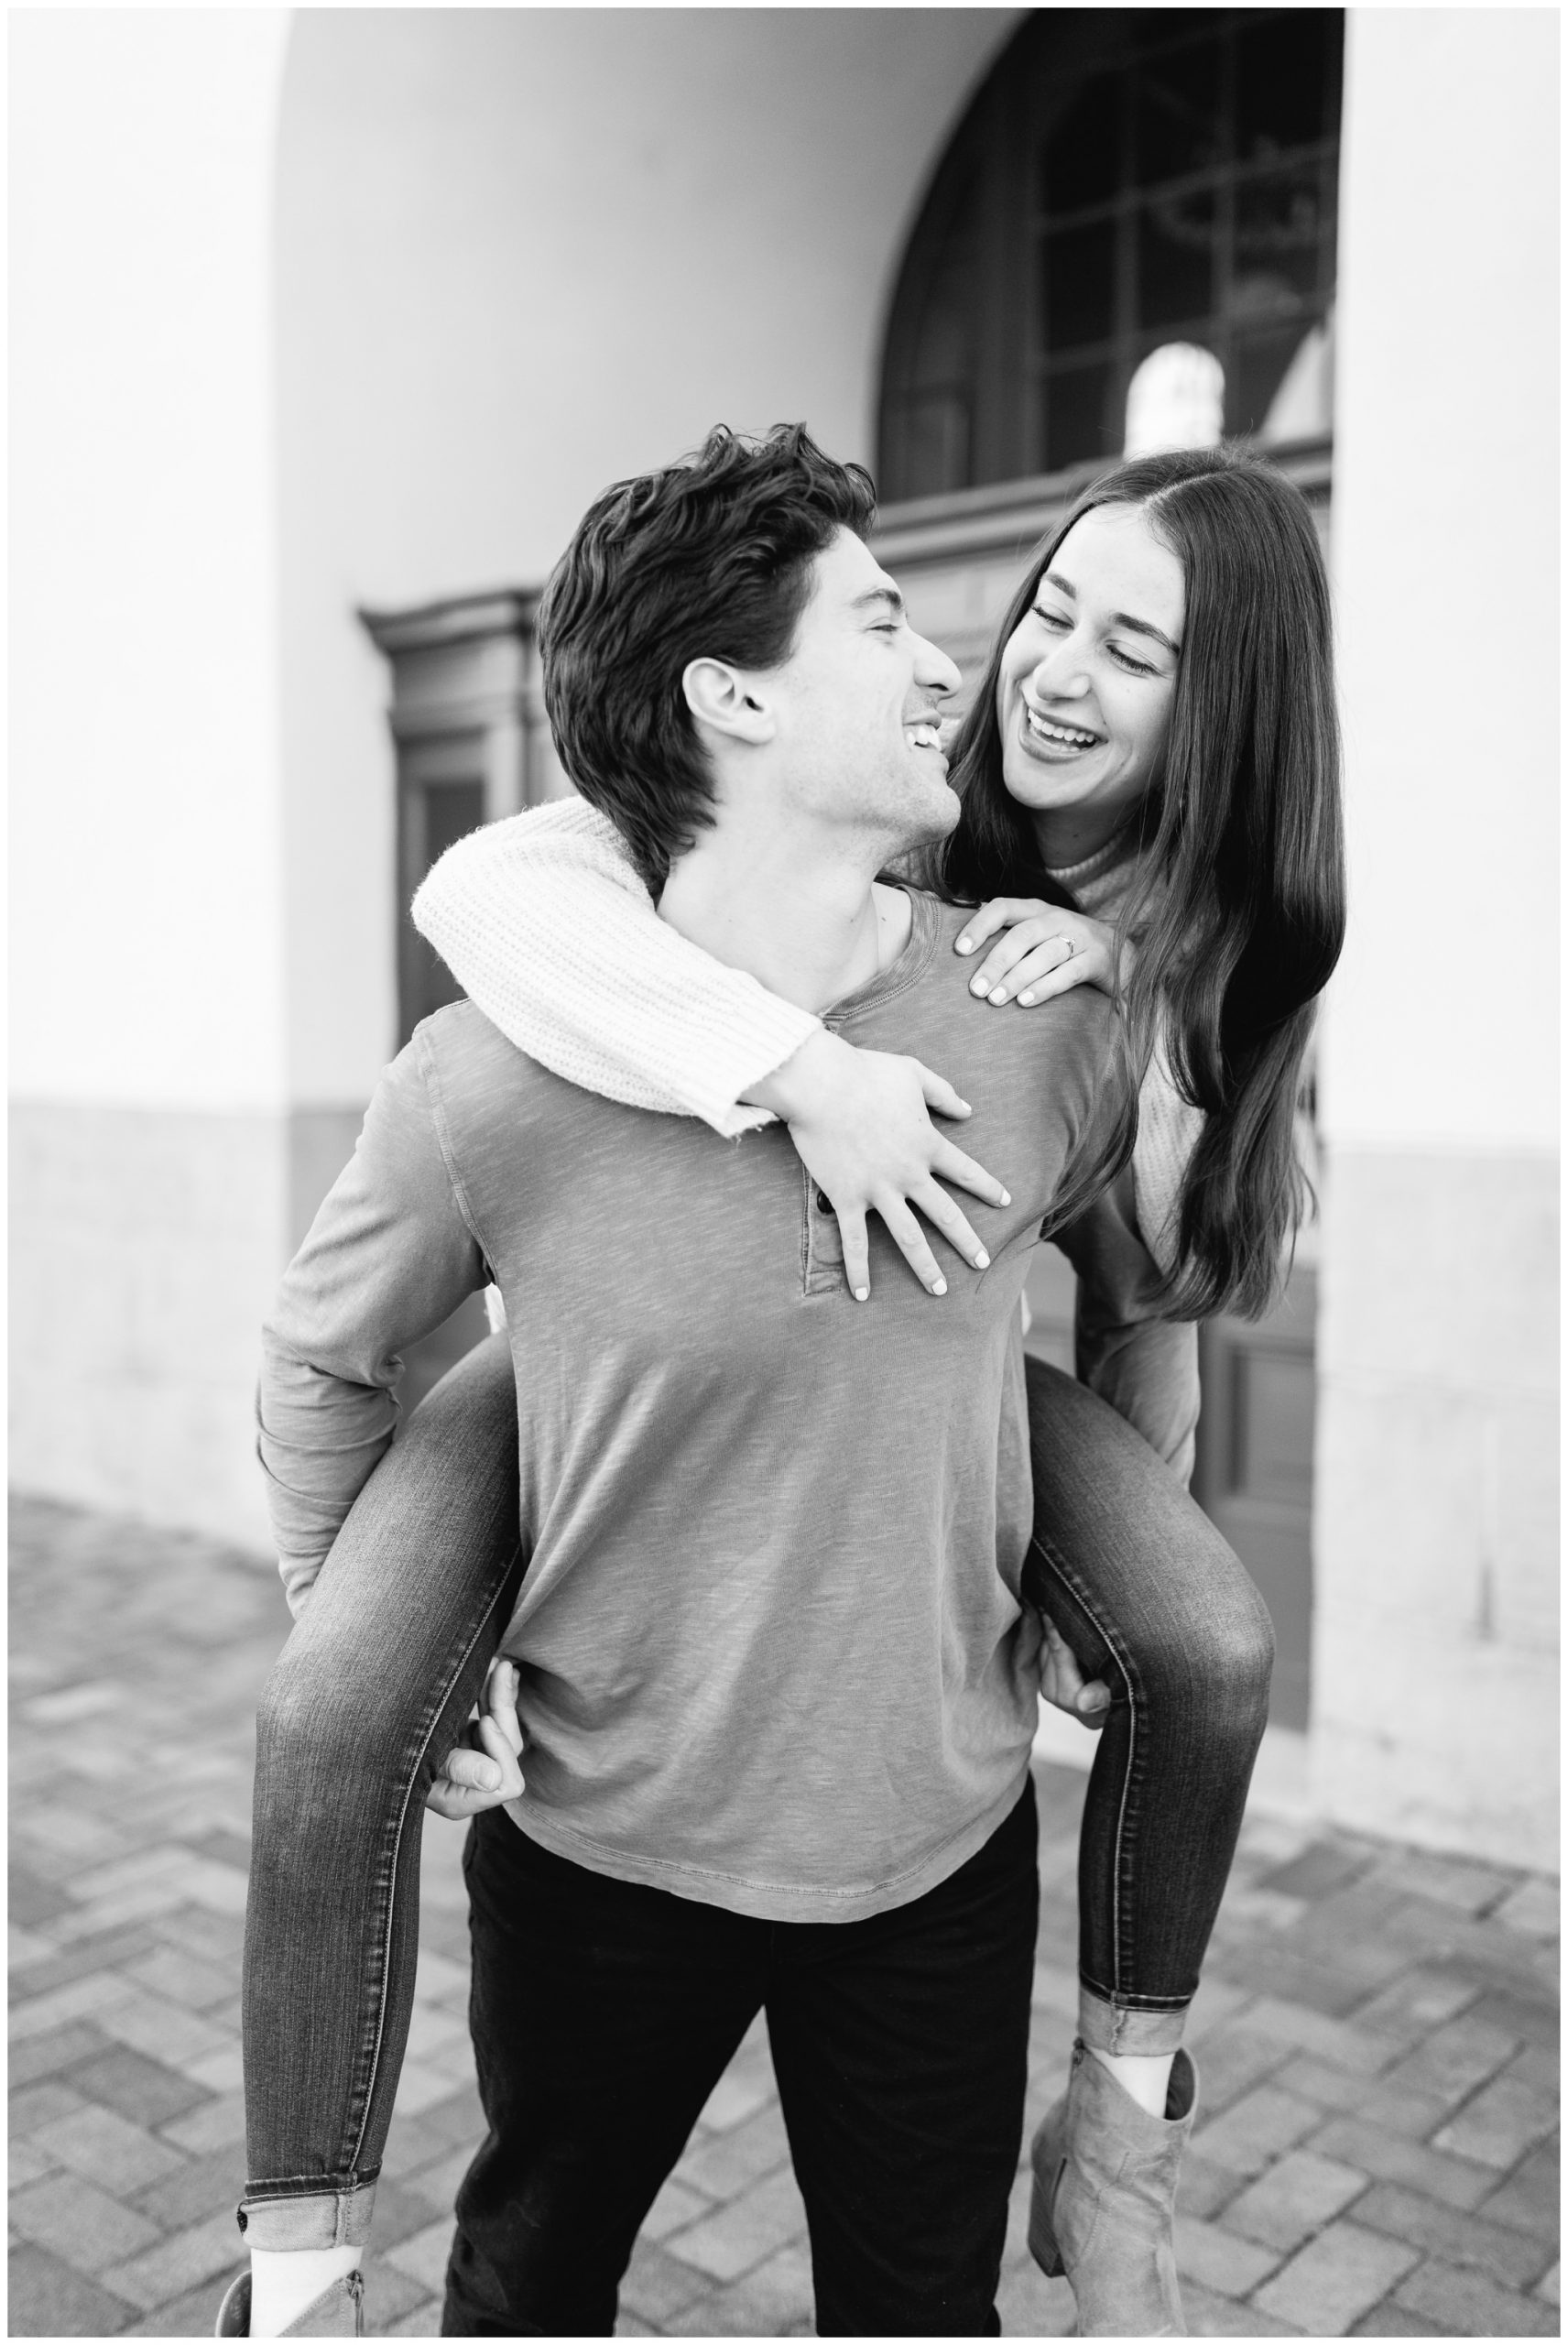 Piggy back ride pose of couple for their engagement photos